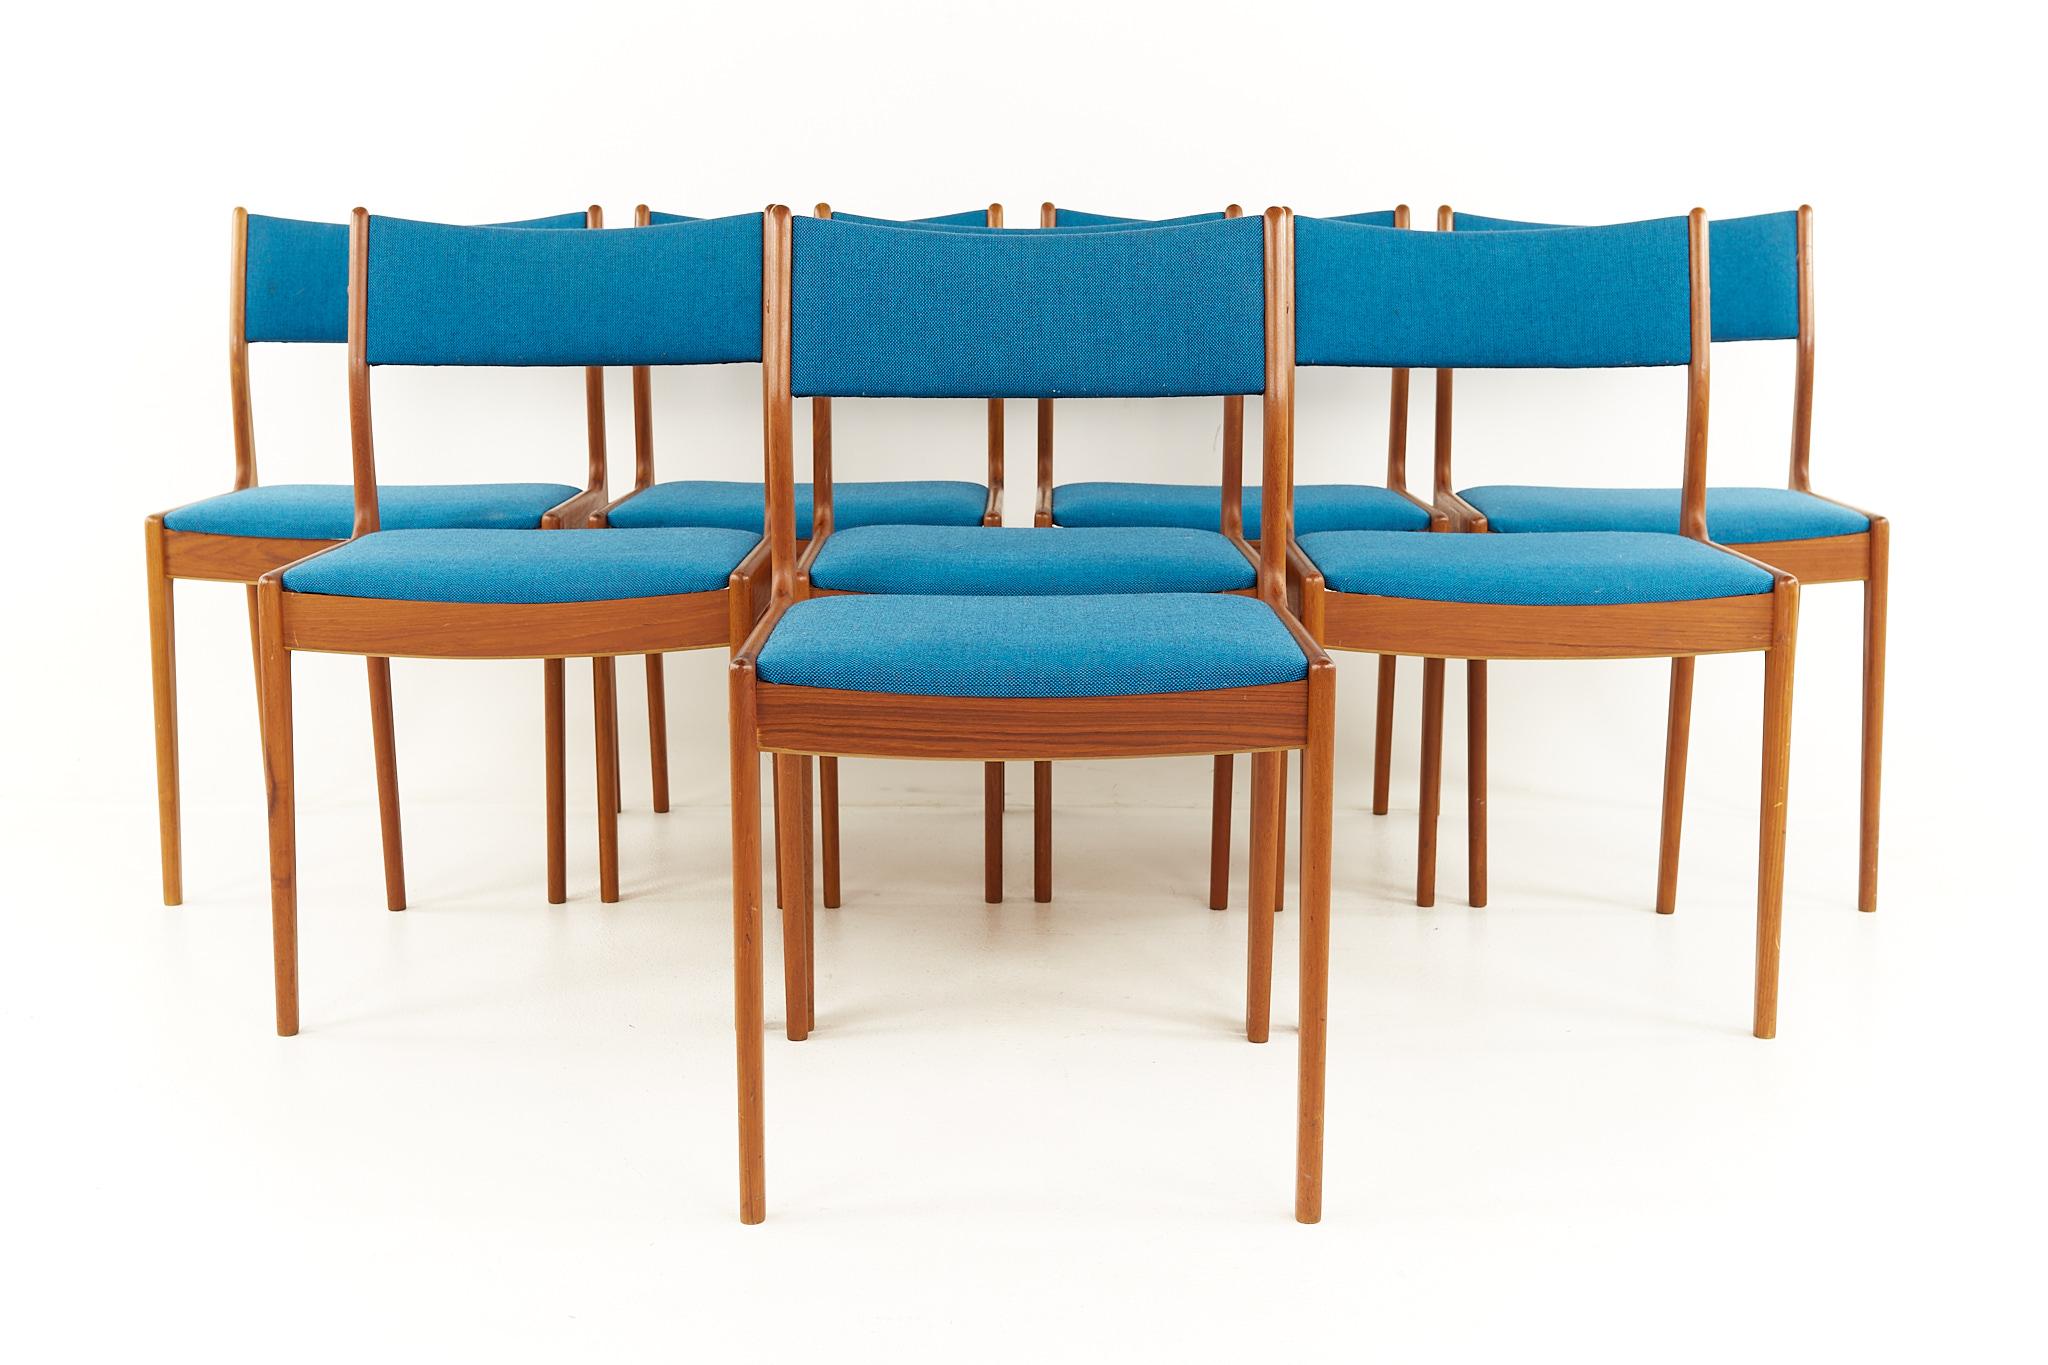 Erik Buch style mid century danish teak dining chairs - set of 8

Each chair measures: 18.25 wide x 19.5 deep x 31 high, with a seat height of 17.75 inches

All pieces of furniture can be had in what we call restored vintage condition. That